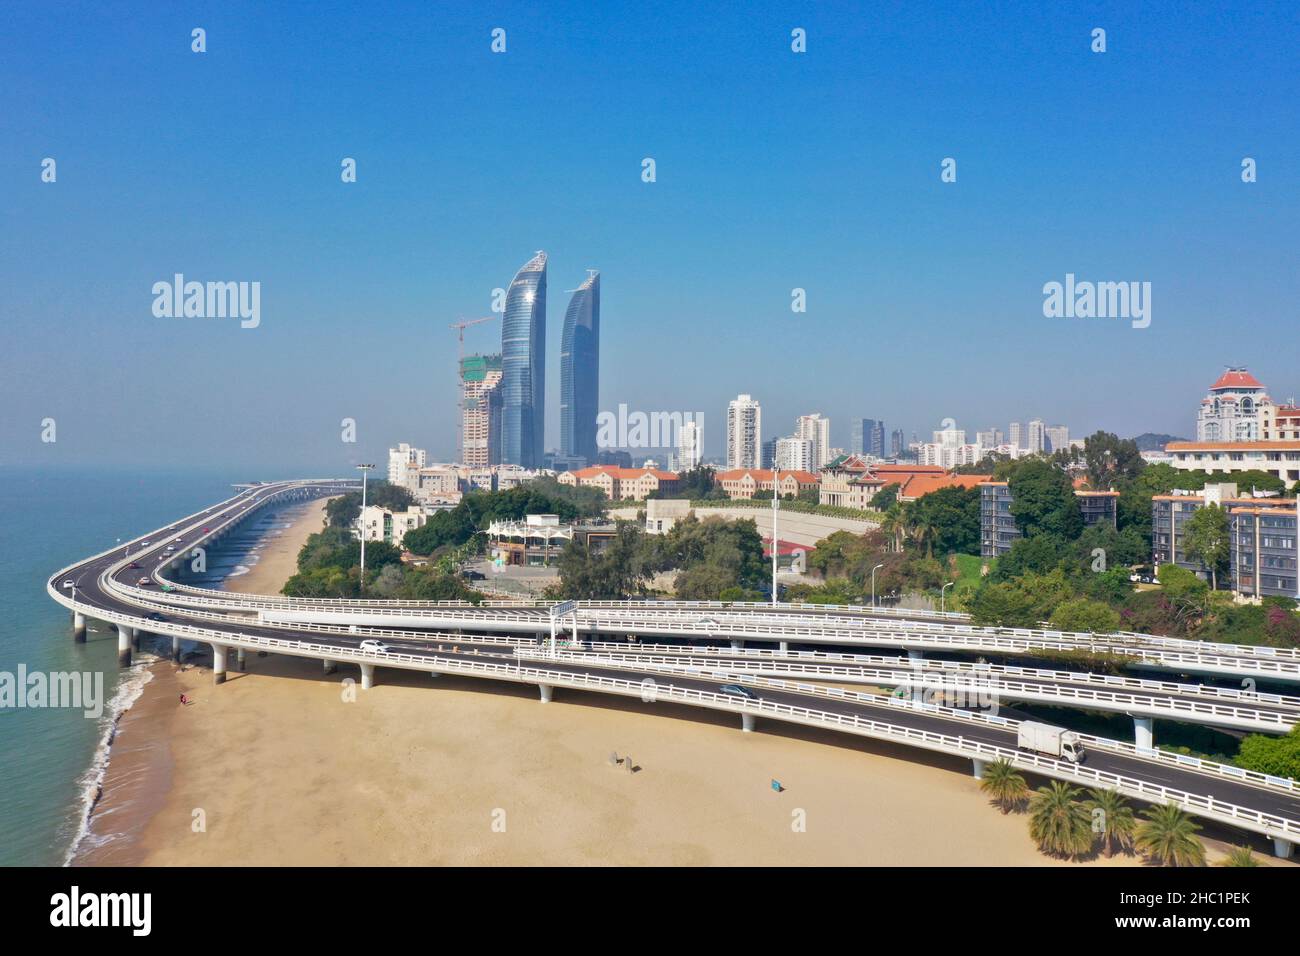 (211221) -- XIAMEN, Dec. 21, 2021 (Xinhua) -- Aerial photo taken on Dec. 12, 2021 shows the city view of Xiamen, southeast China's Fujian Province. This year marks the 40th anniversary of the establishment of the Xiamen Special Economic Zone (SEZ). The Xiamen SEZ has made important contributions to the country's reform, opening up, and socialist modernization, and played a unique role in promoting national reunification. (Xinhua/Jiang Kehong) Stock Photo